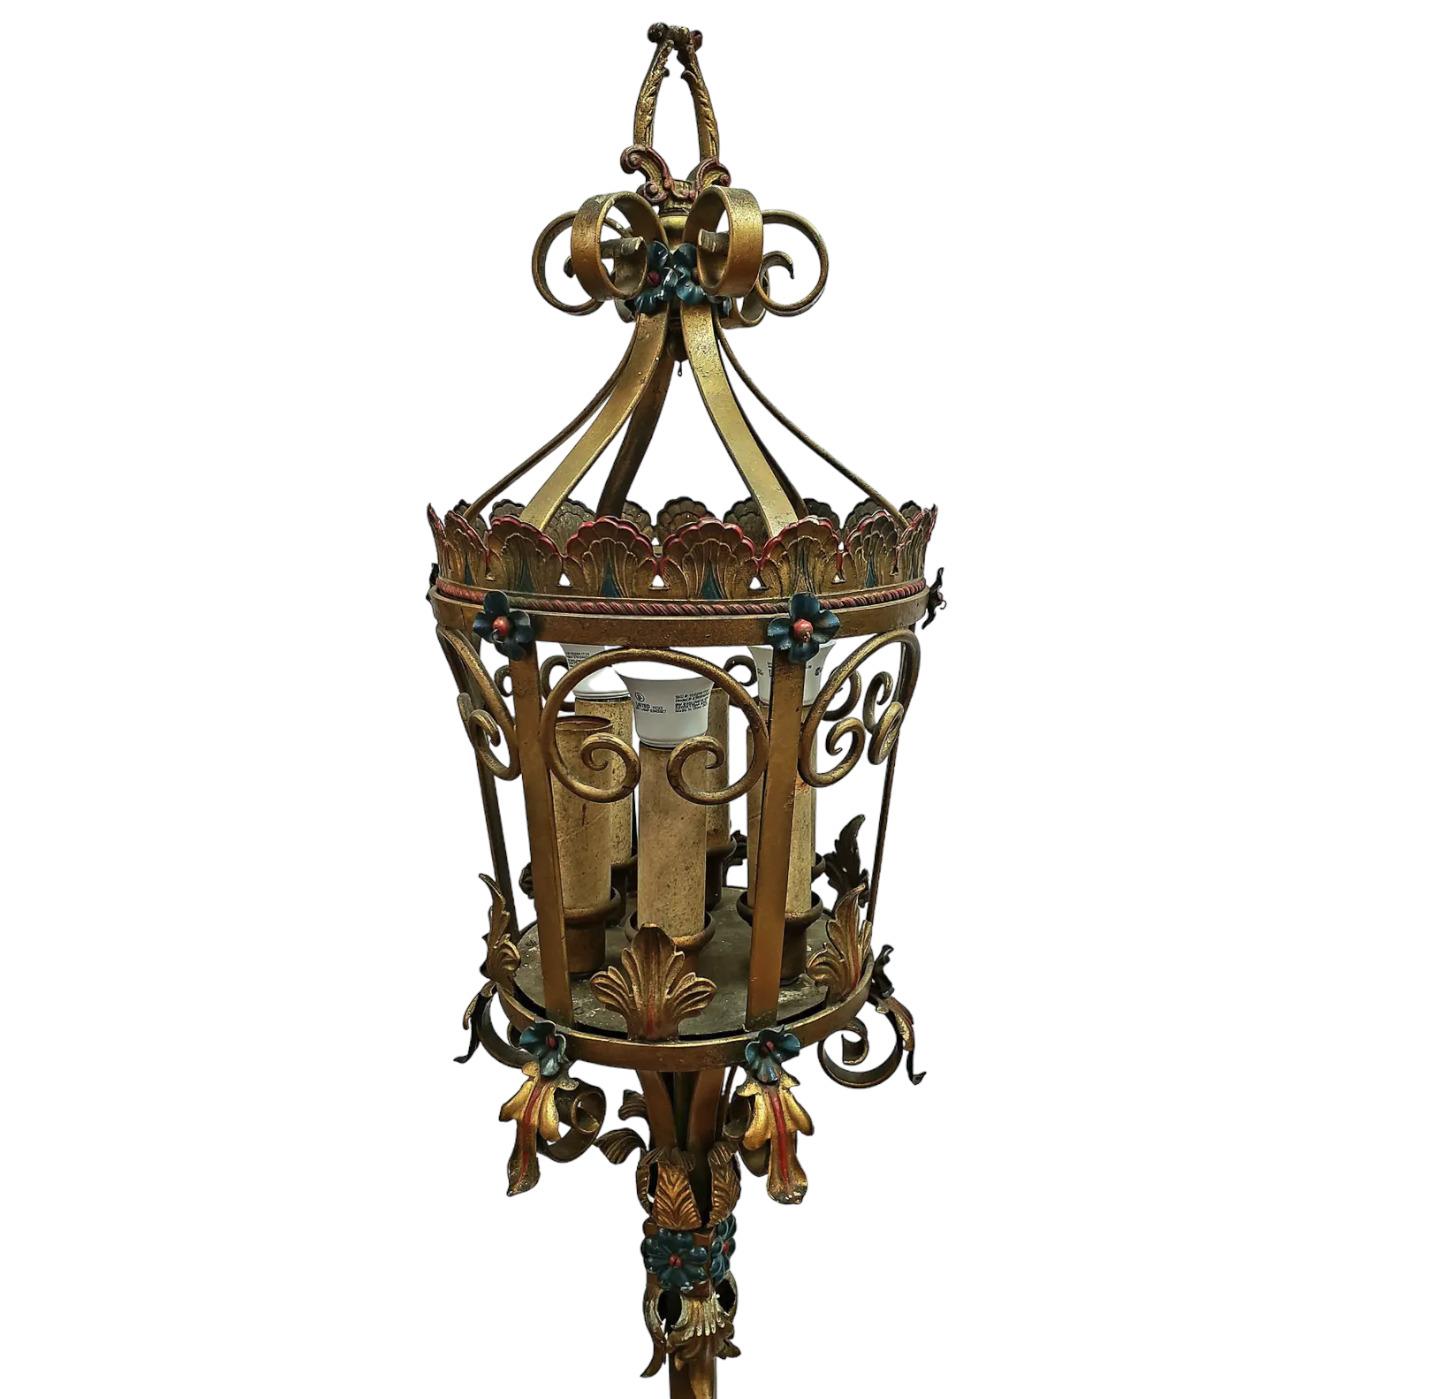 A beautiful pair of 19th Century Italian Venetian tole lanterns. Hand-forged of wrought iron, the lanterns are embellished with acanthus leaves and flower blooms, supported by a twisted rope center pole, anchored to a round heavy base. The inside of